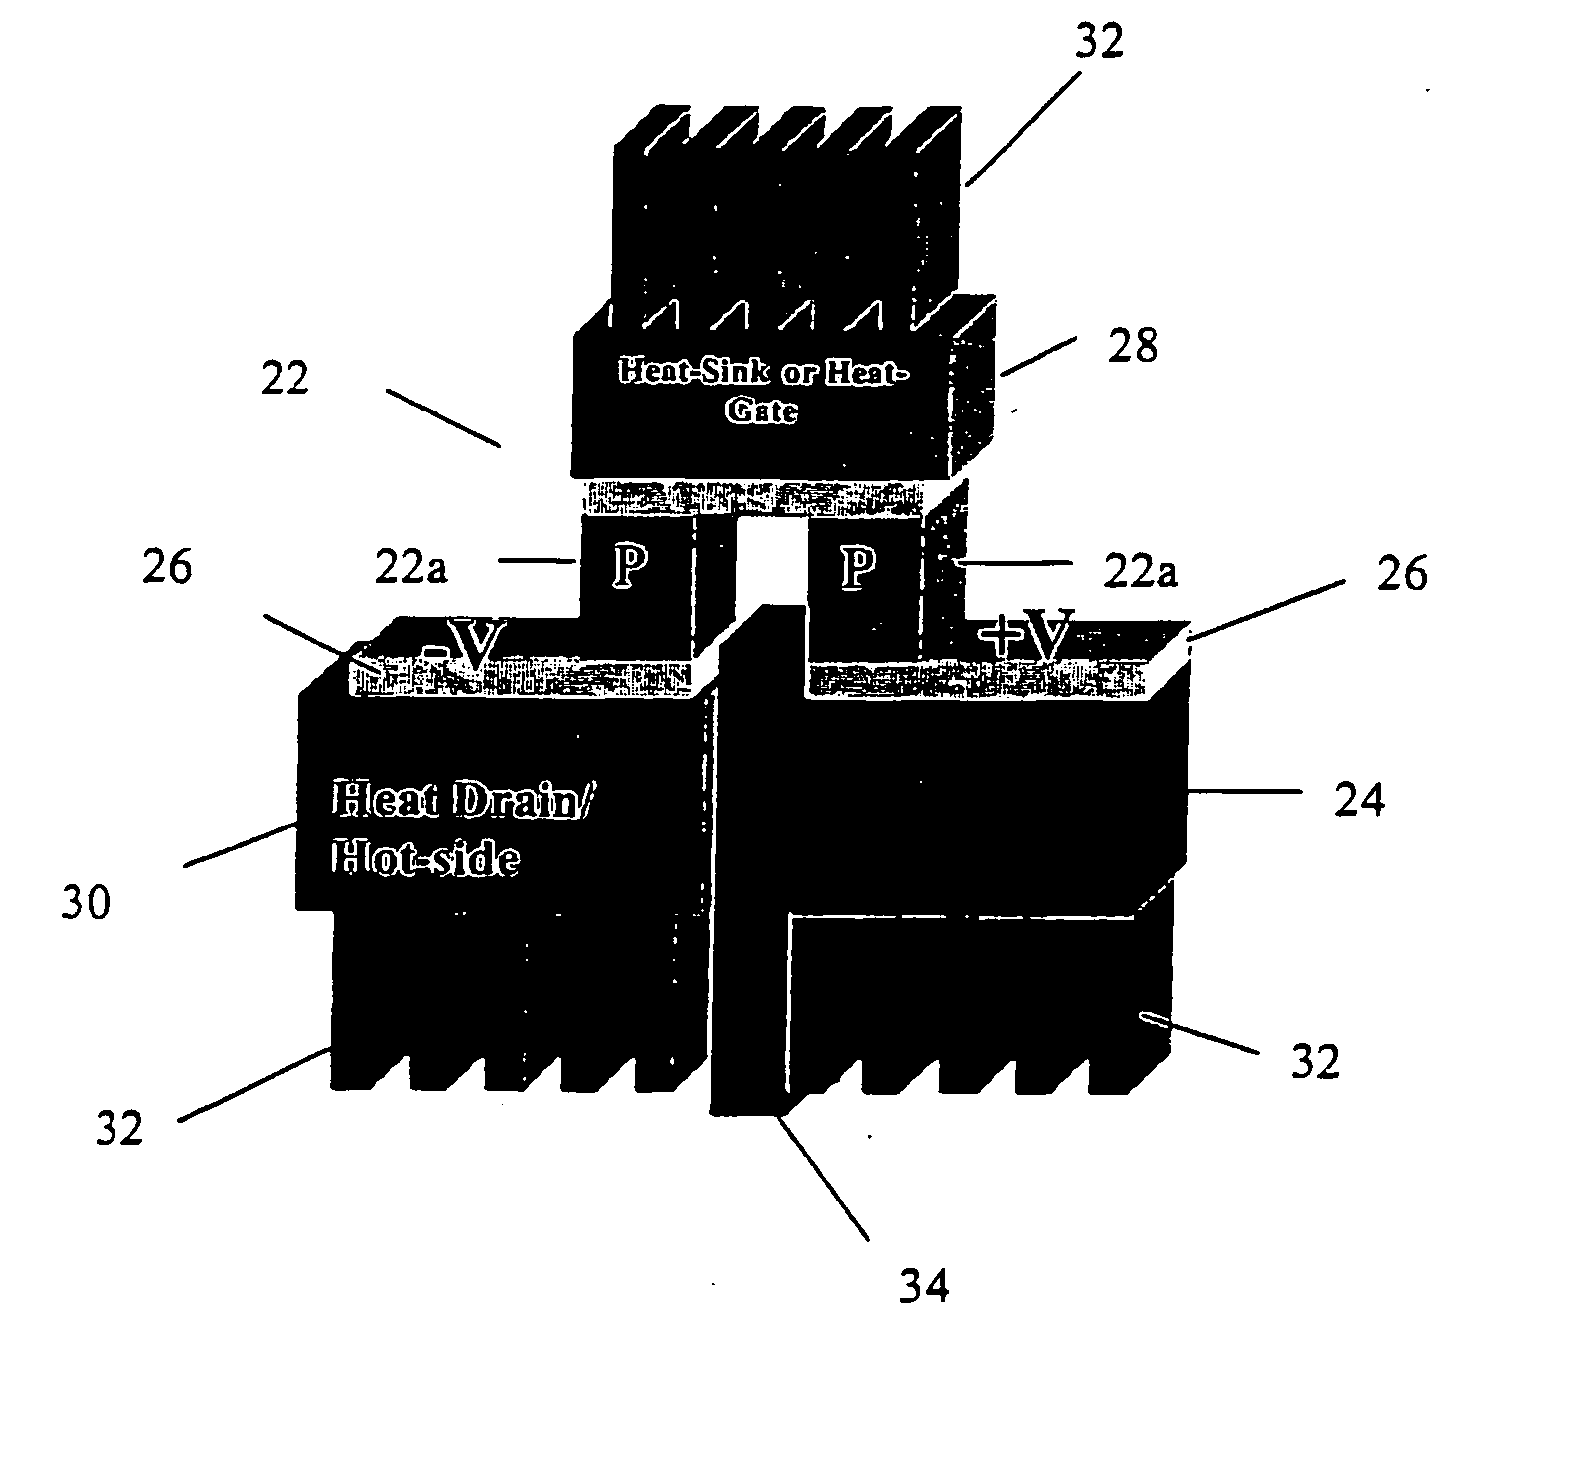 Trans-thermoelectric device